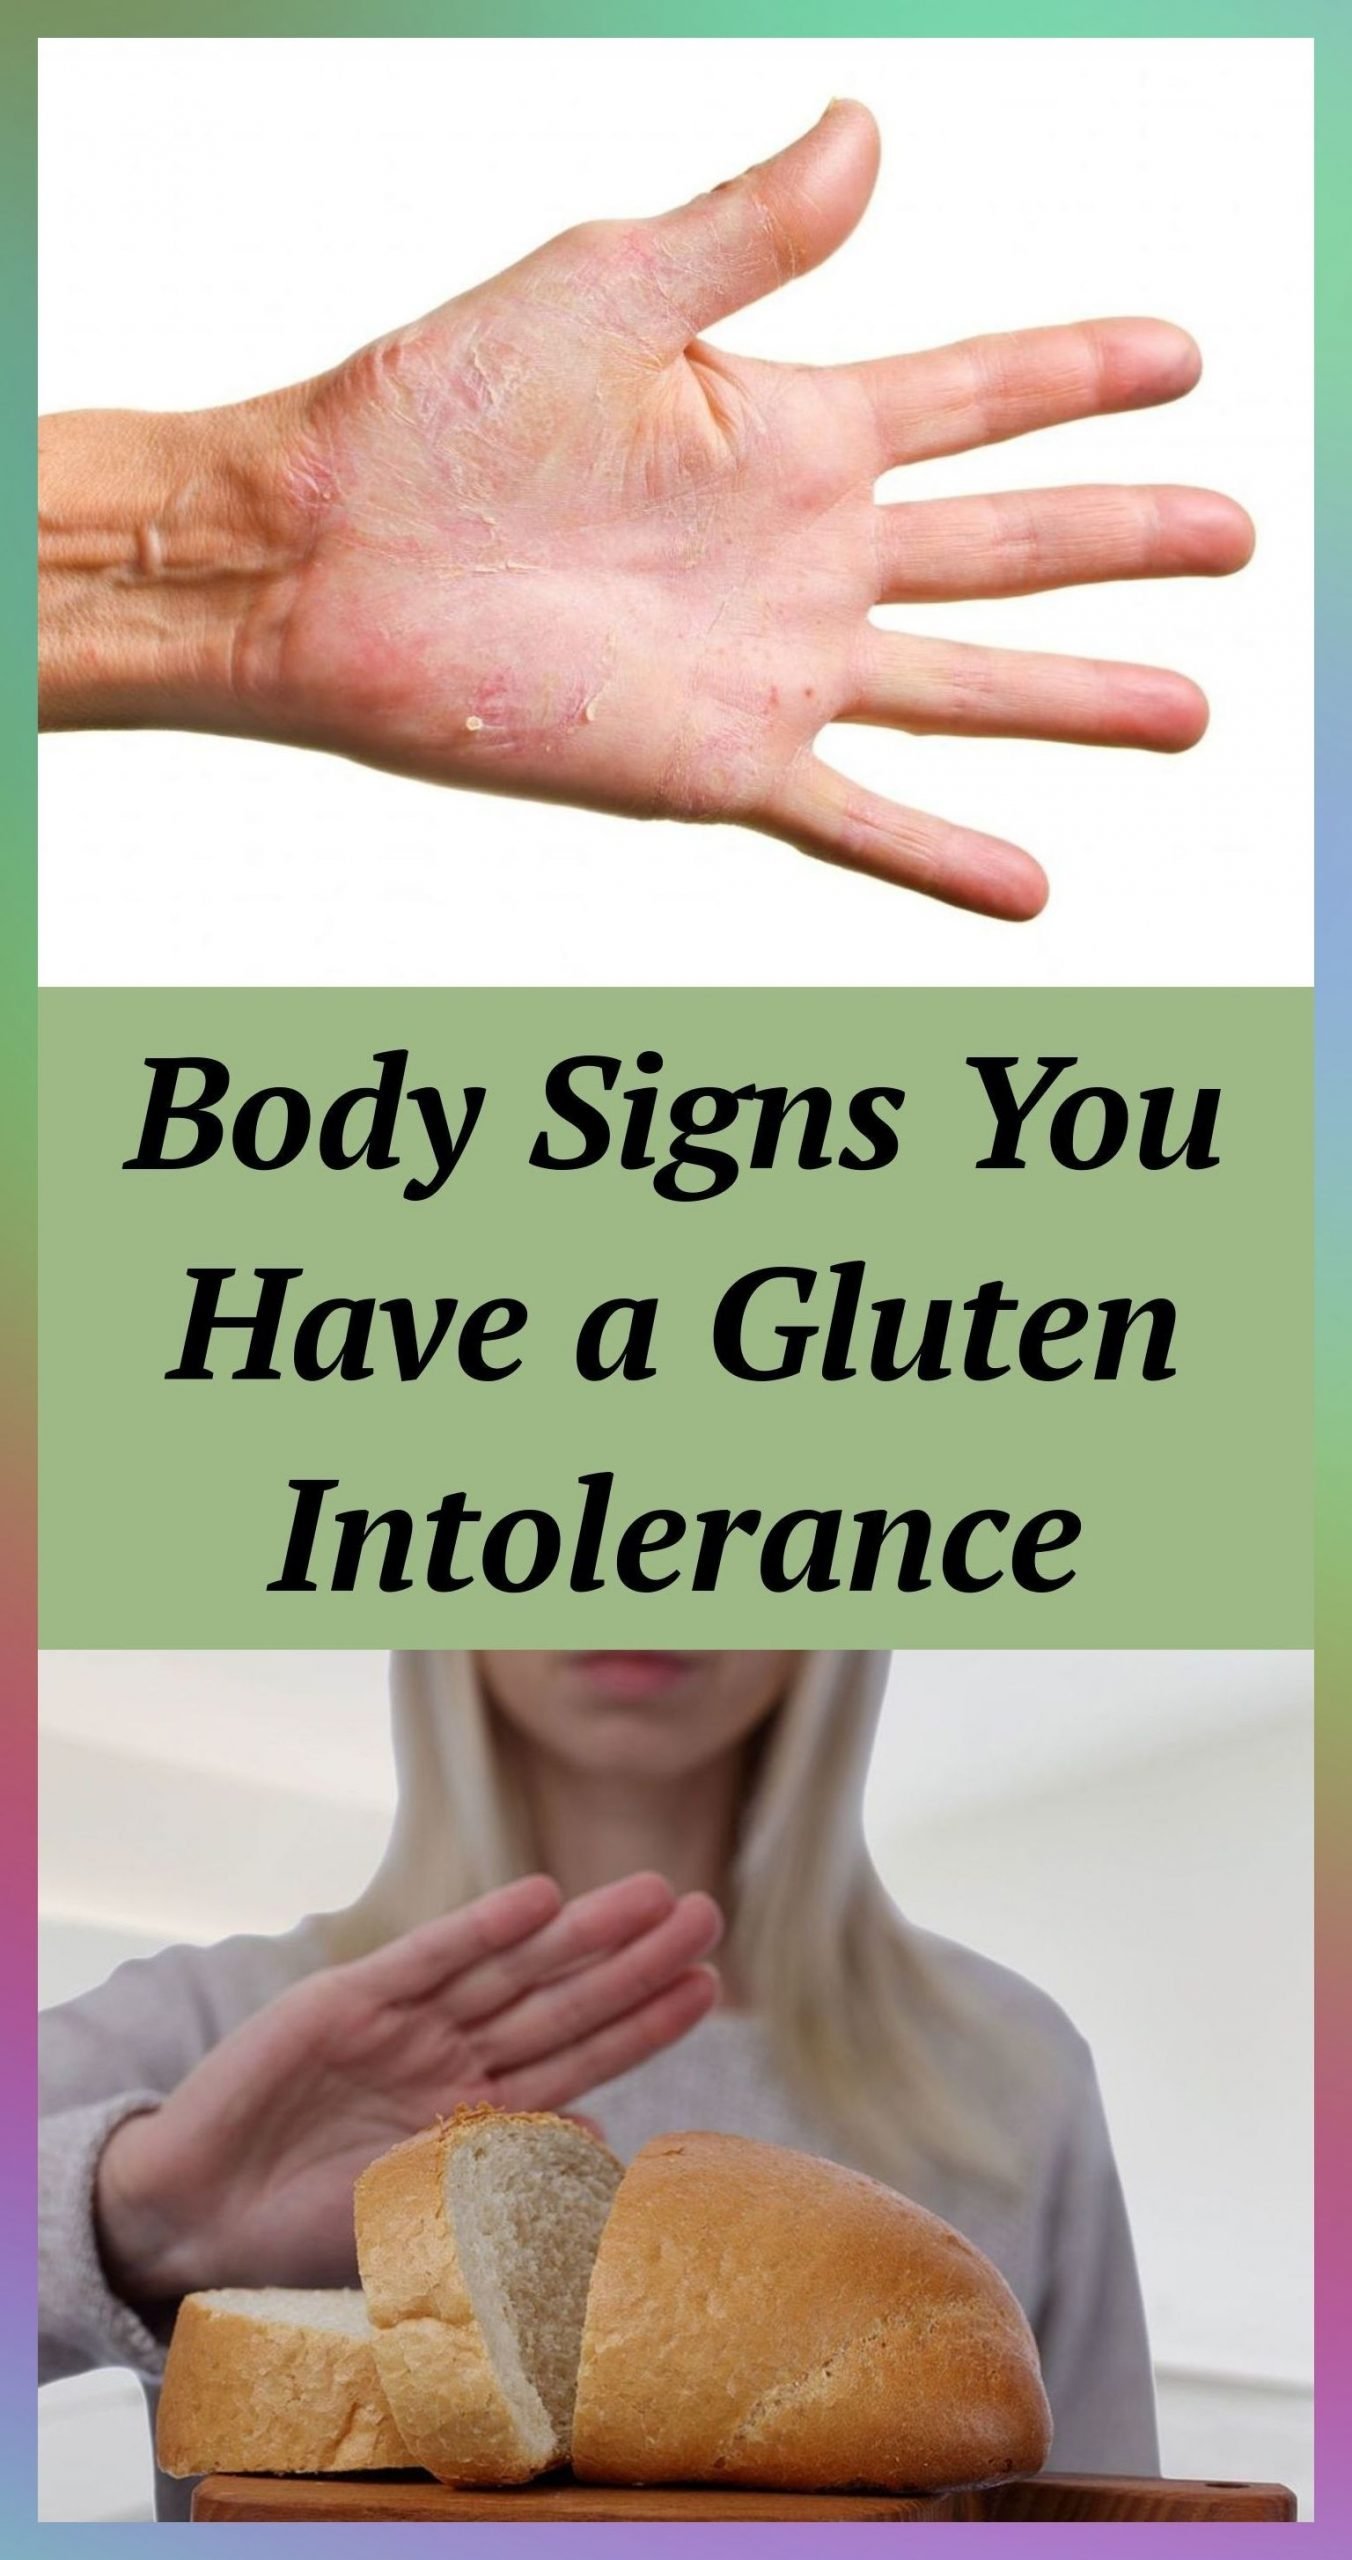 Body Signs You Have a Gluten Intolerance